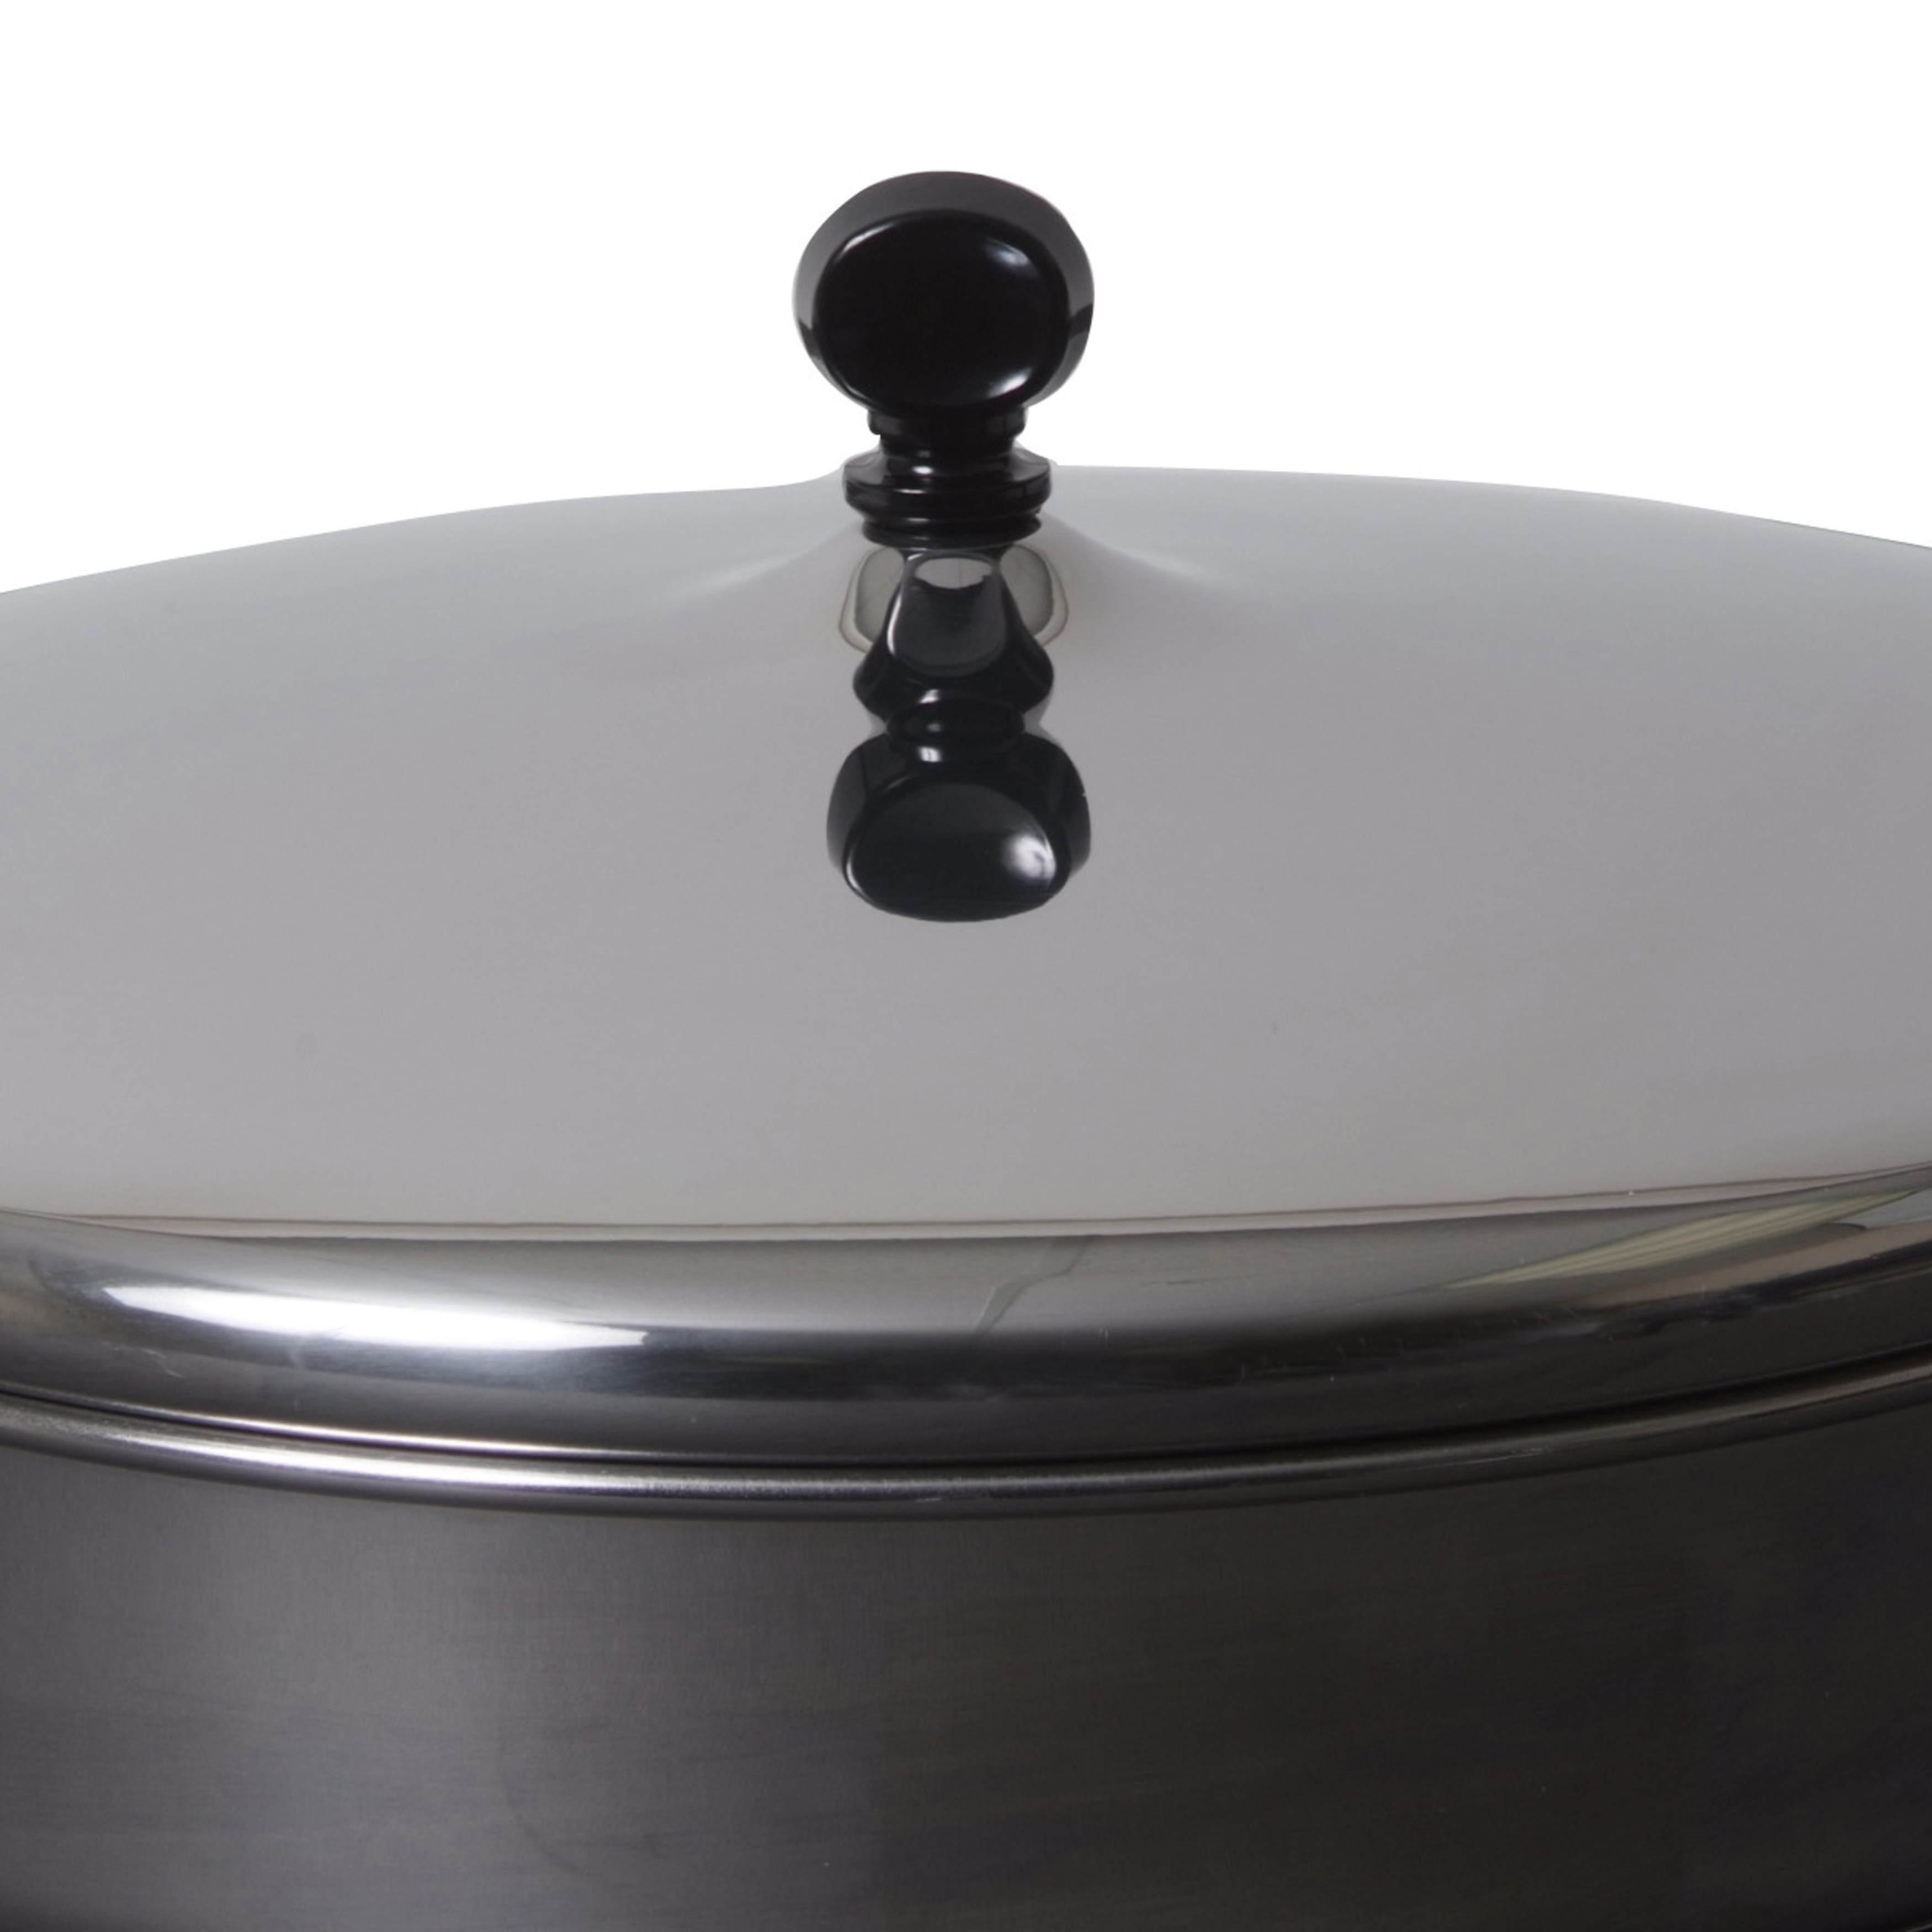 https://ak1.ostkcdn.com/images/products/6200859/Farberware-Classic-Stainless-Steel-4-quart-Covered-Saucepot-2aaadd8c-c52e-4693-a762-ce07f101239e.jpg